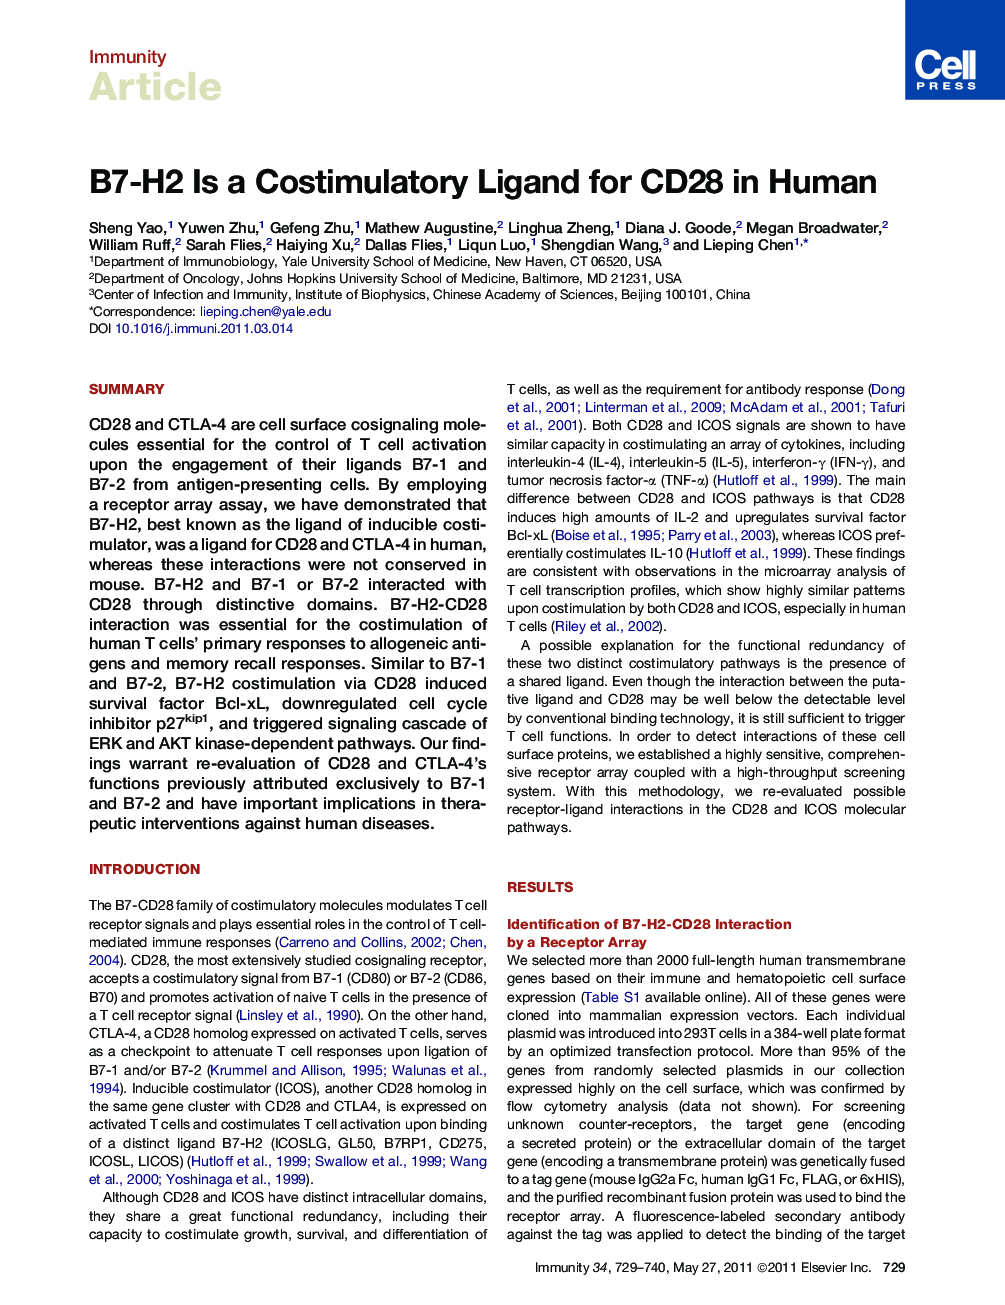 B7-H2 Is a Costimulatory Ligand for CD28 in Human